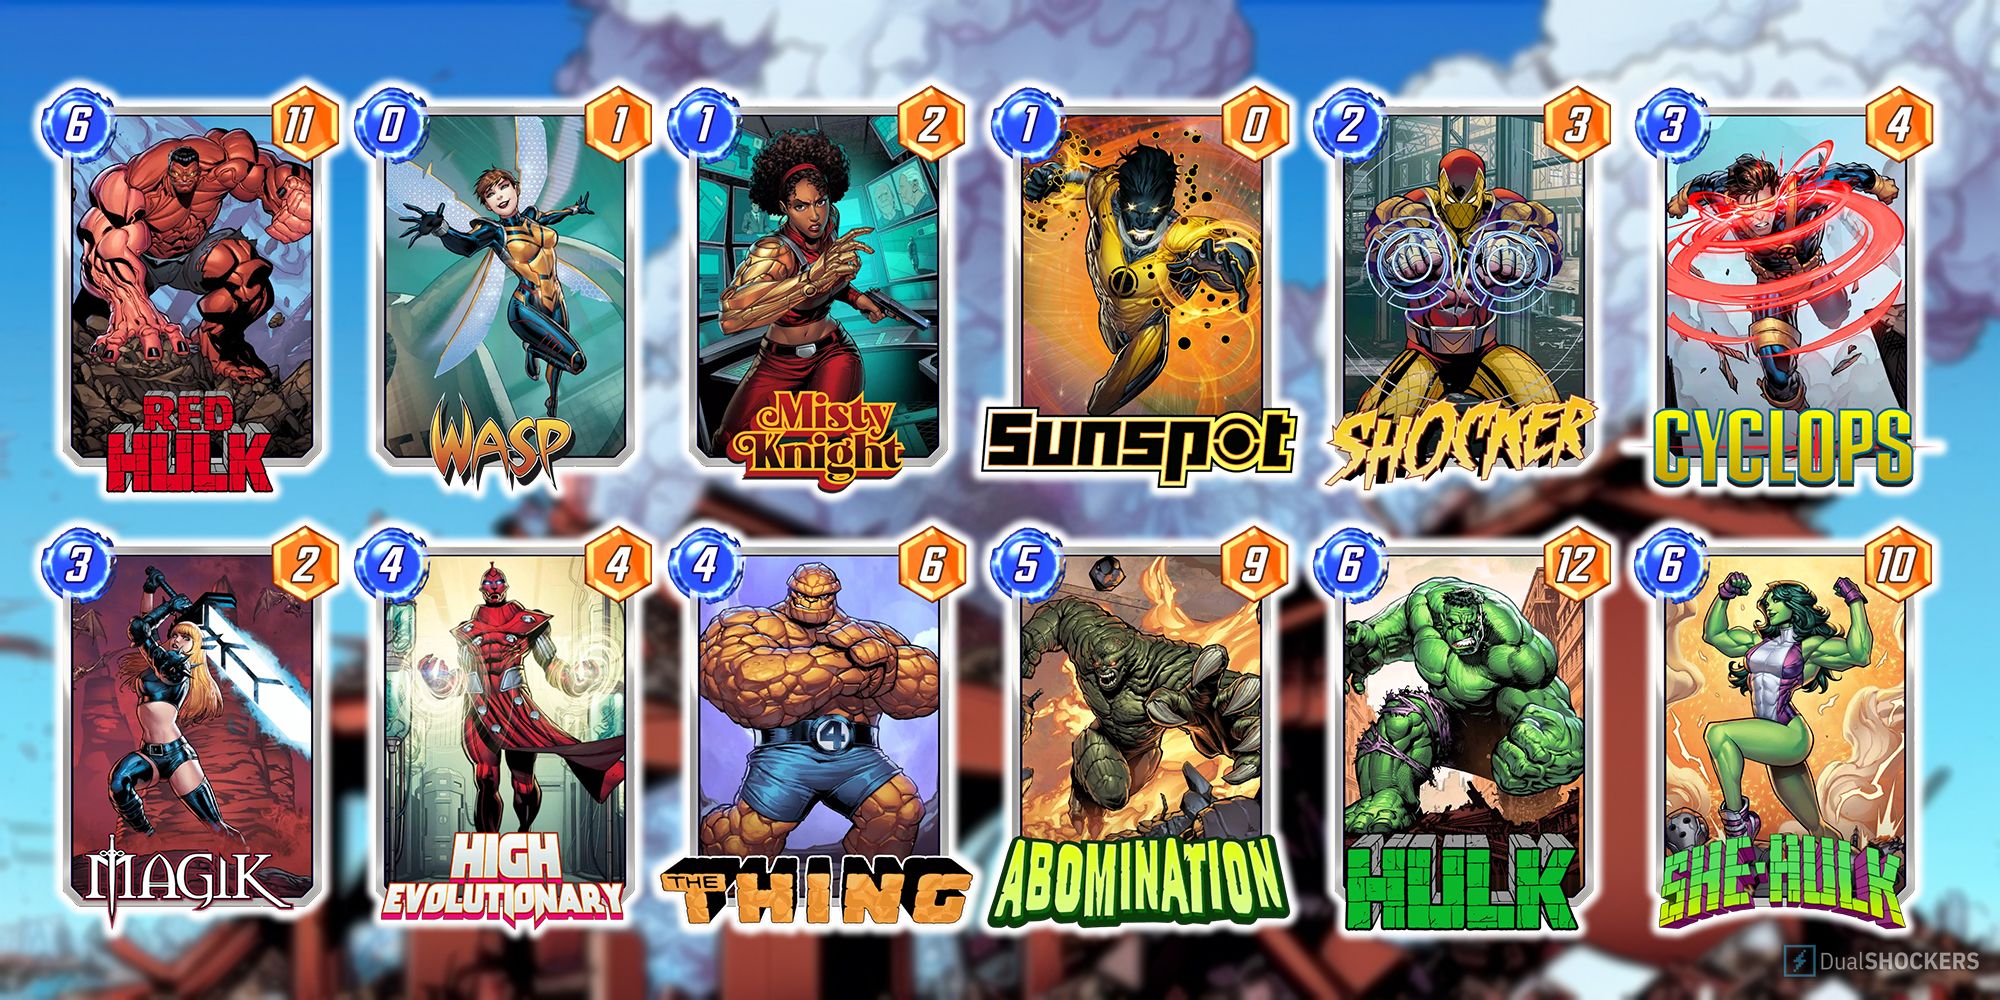 A Marvel Snap deck comprised of Red Hulk, Wasp, Misty Knight, Sunspot, Shocker, Cyclops, Magik, High Evolutionary, The Thing, Abomination, Hulk, and She-Hulk.